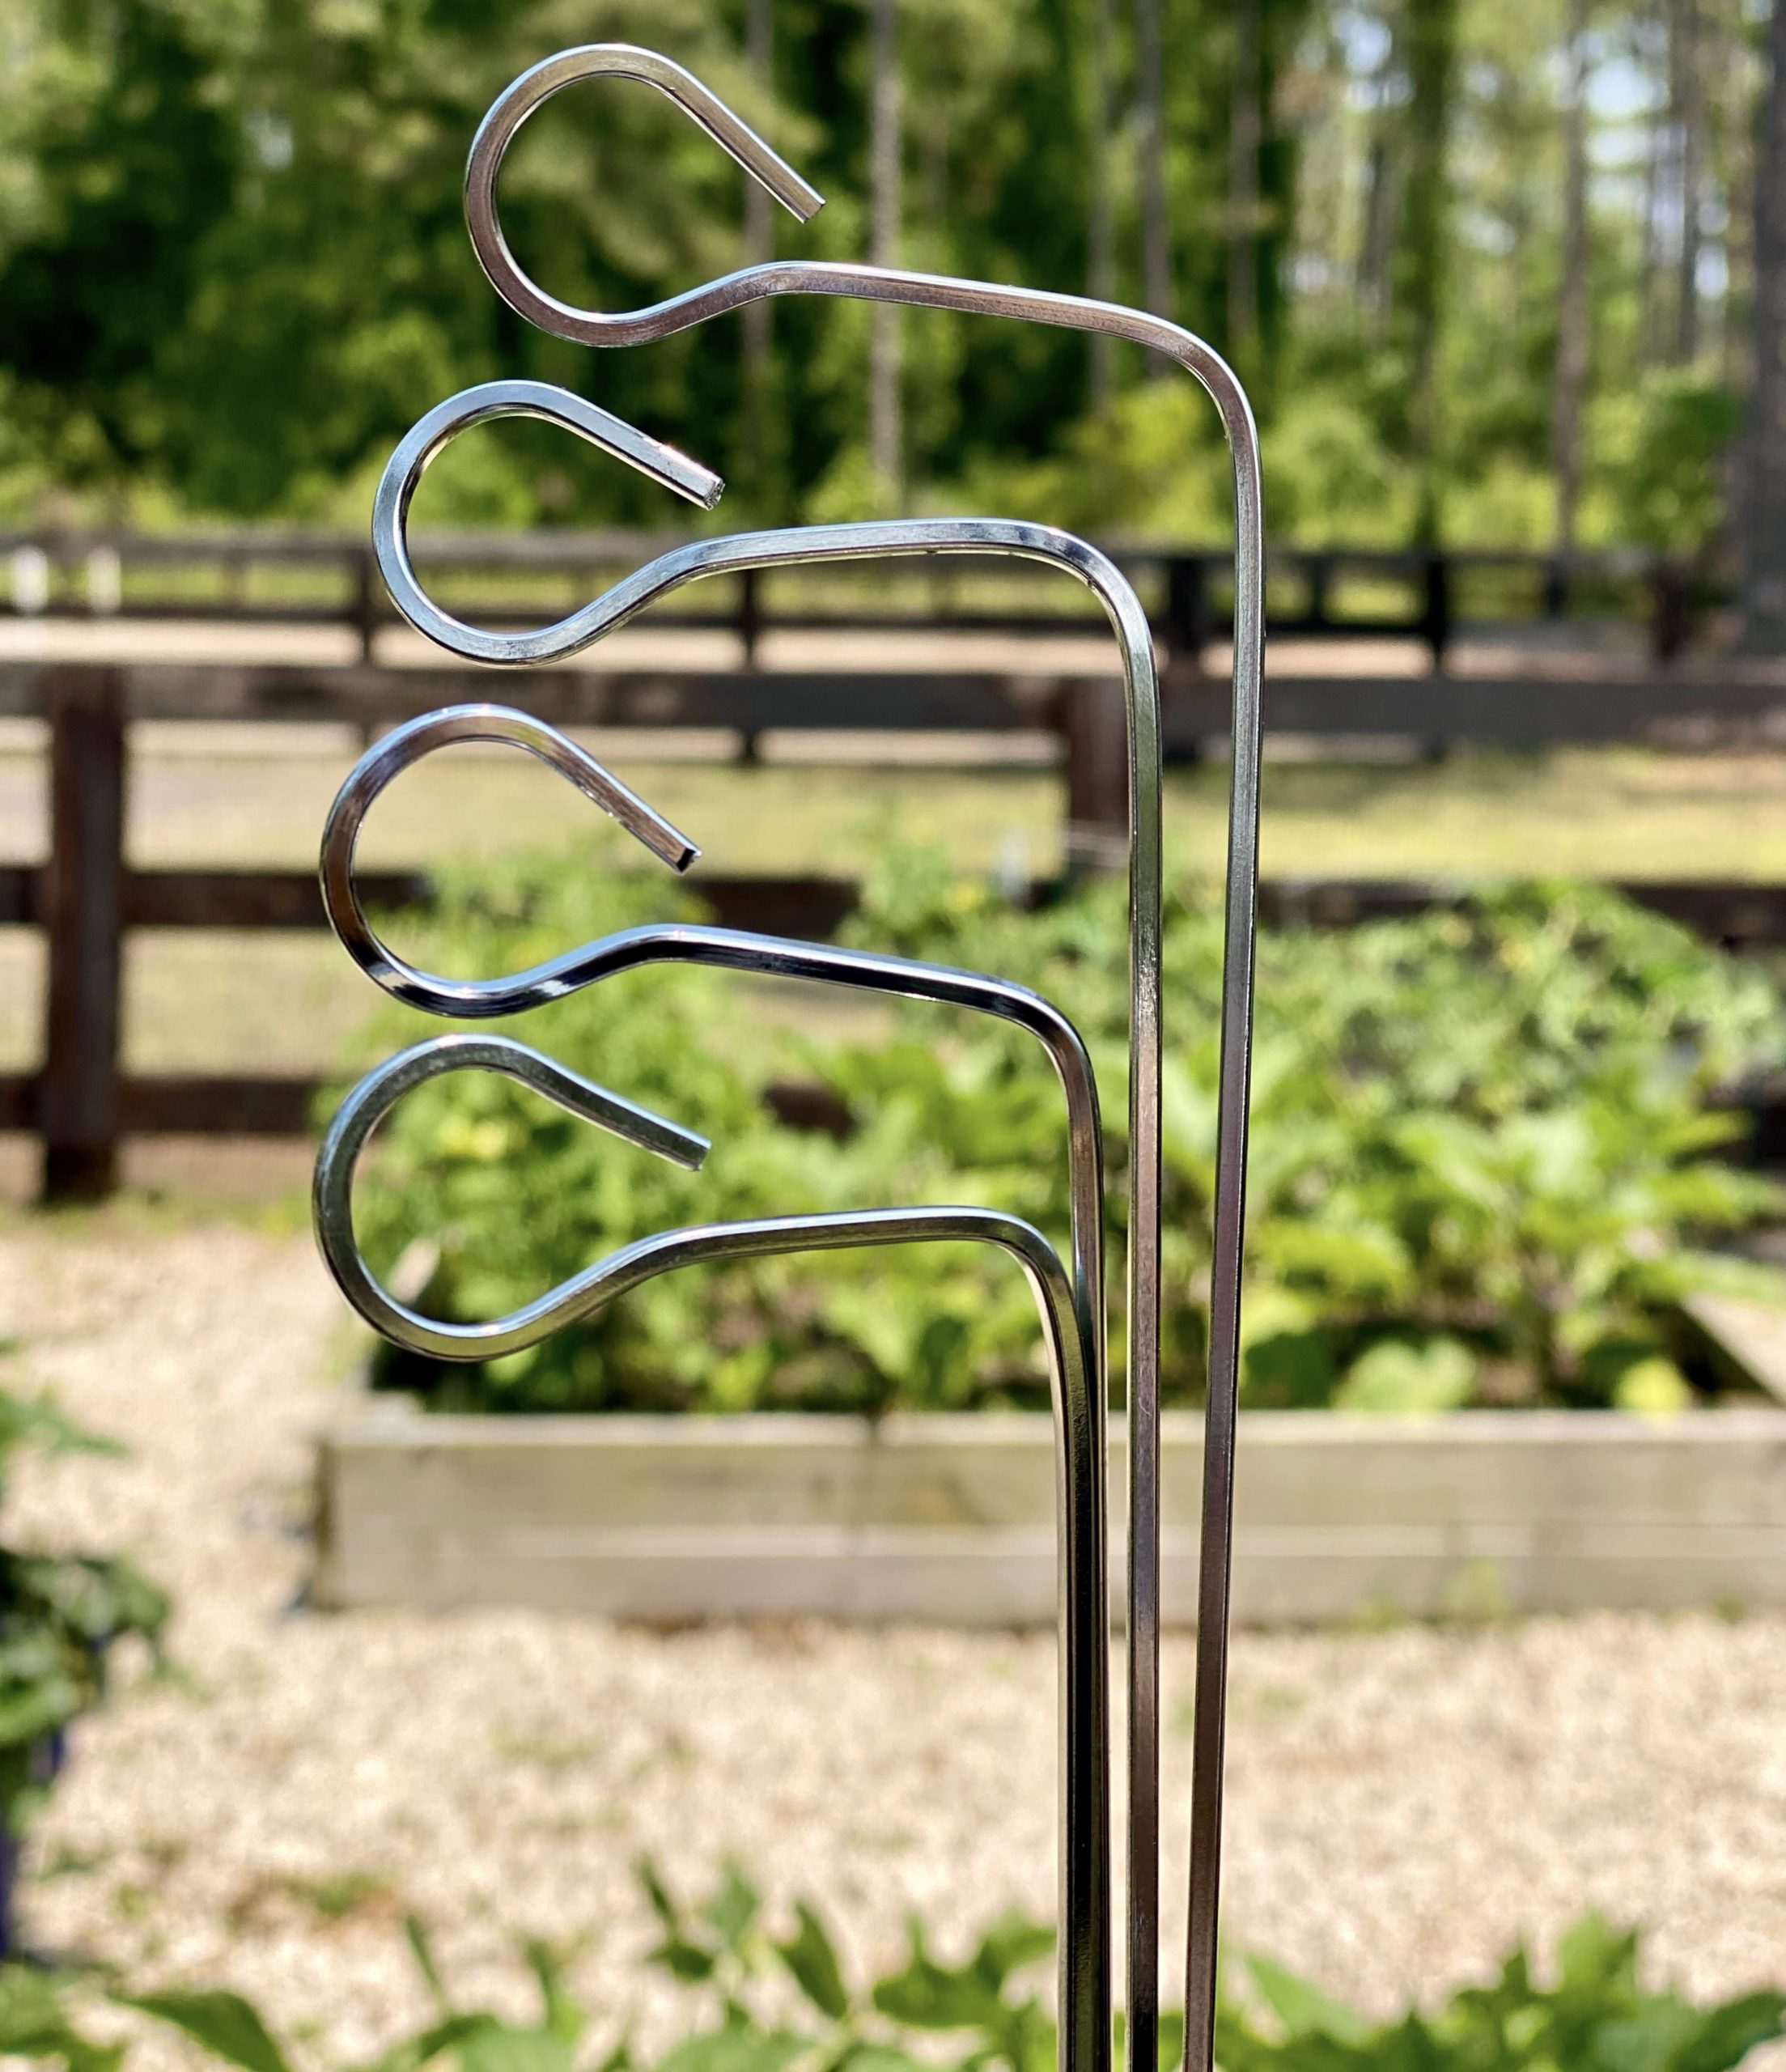 Metal skewers being held up in front of the garden. The skewers are bent at a ninety degree angle with the opening of the circle on top so that the tin can top can hang off when used as a garden marker. 